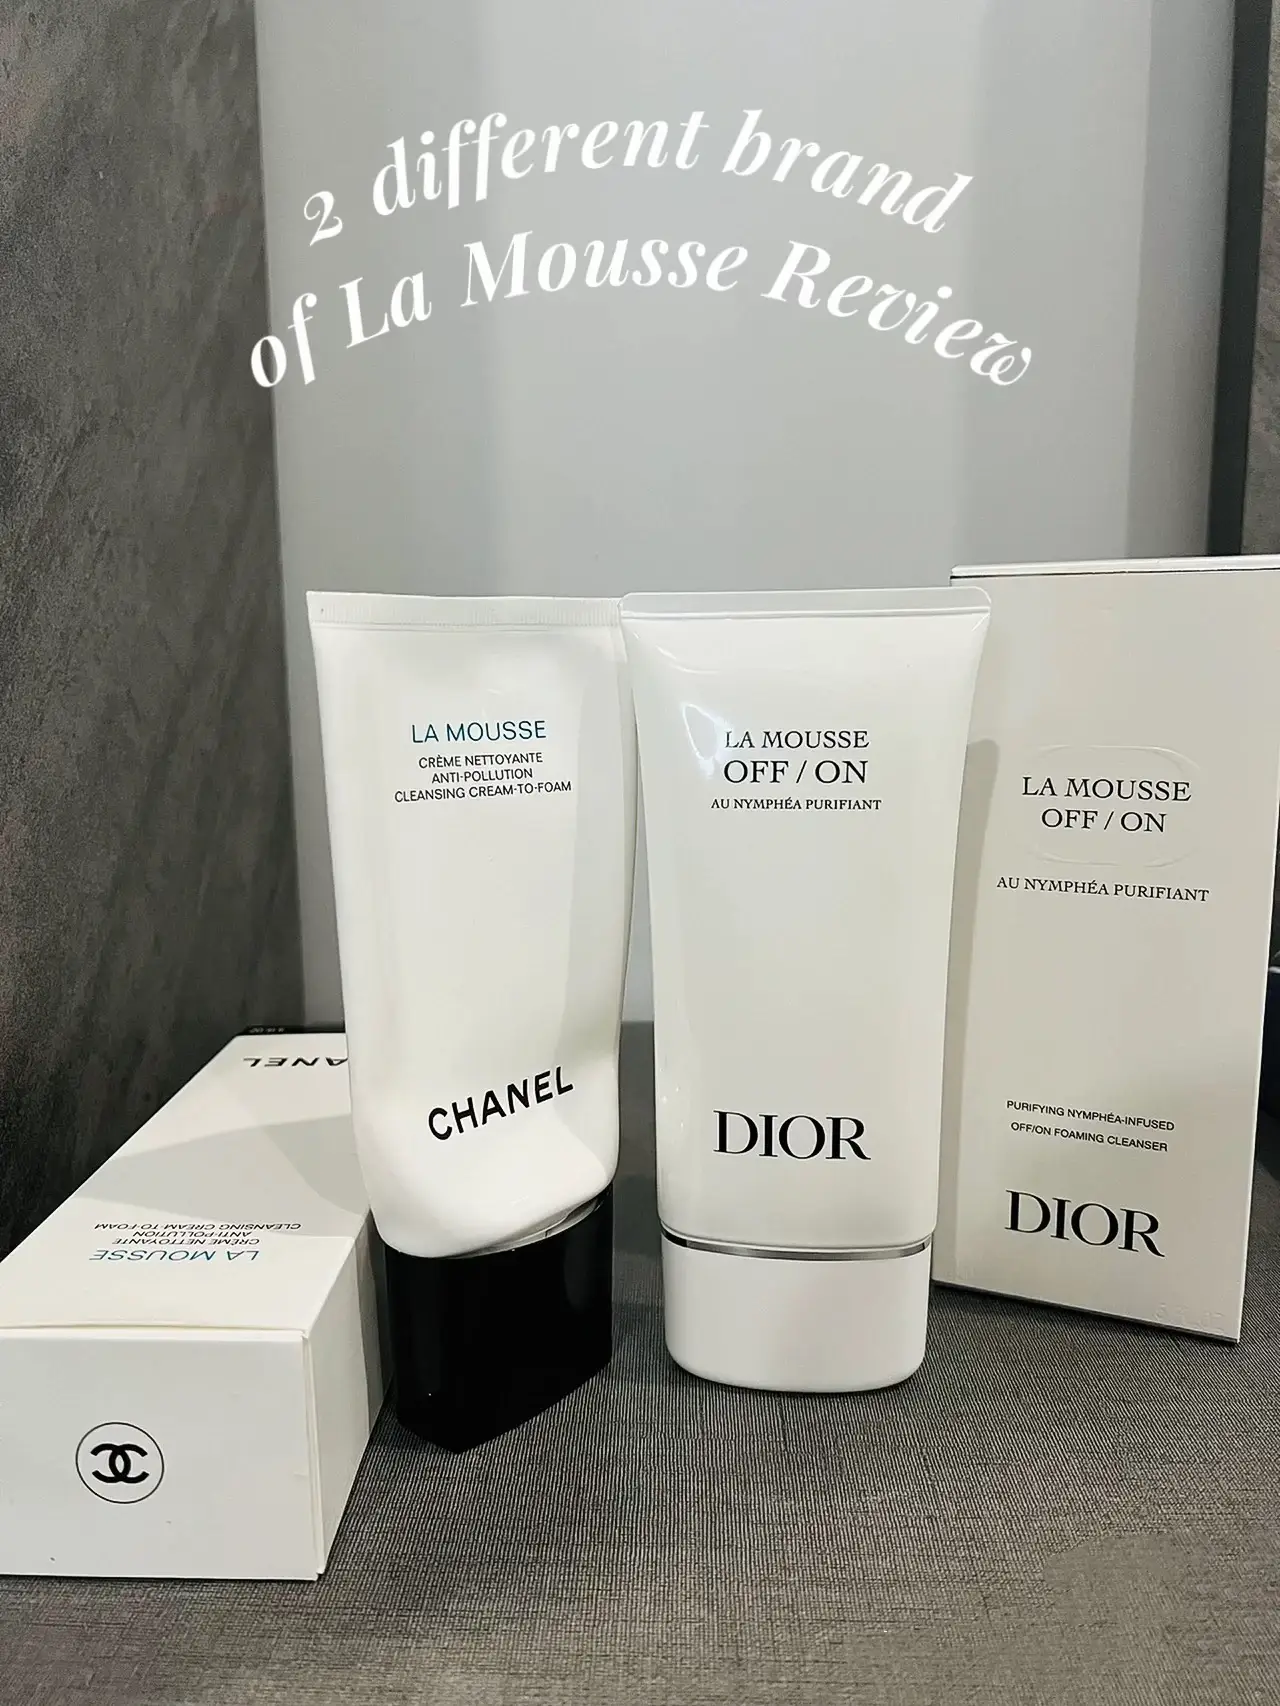 2 different brand of La Mousse Review